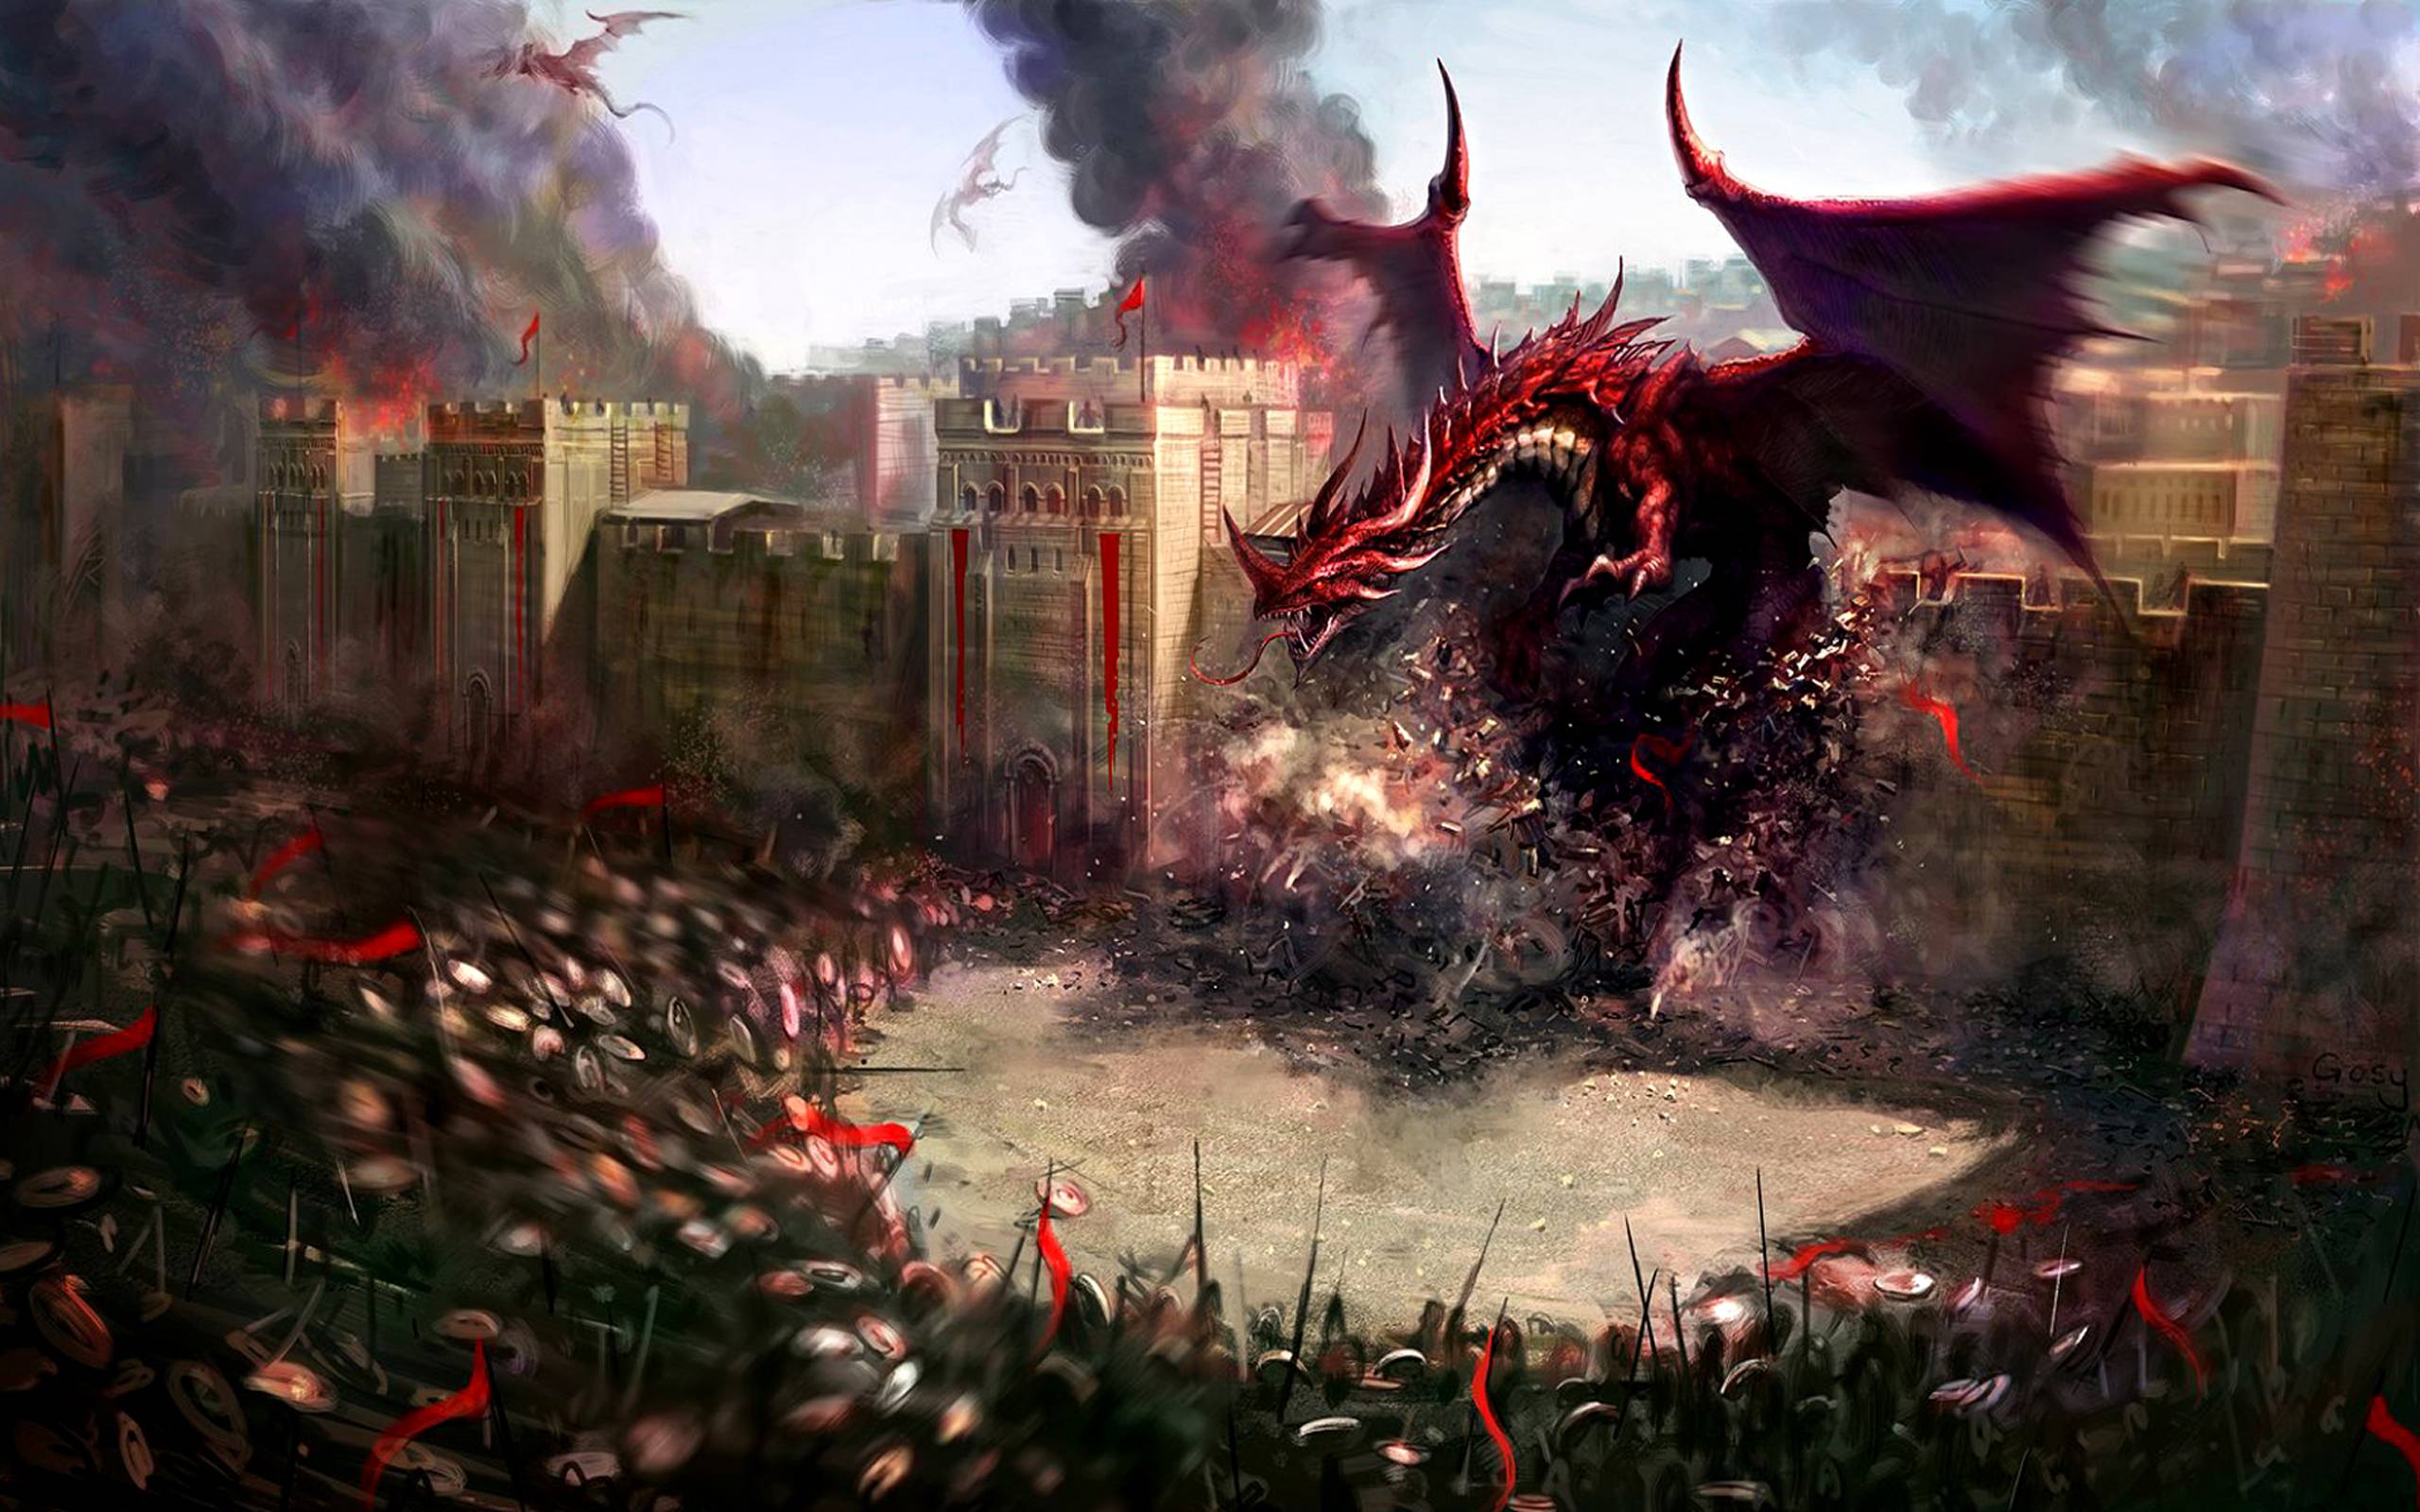 Attack Of The Red Dragon Wallpaper 2560x1600